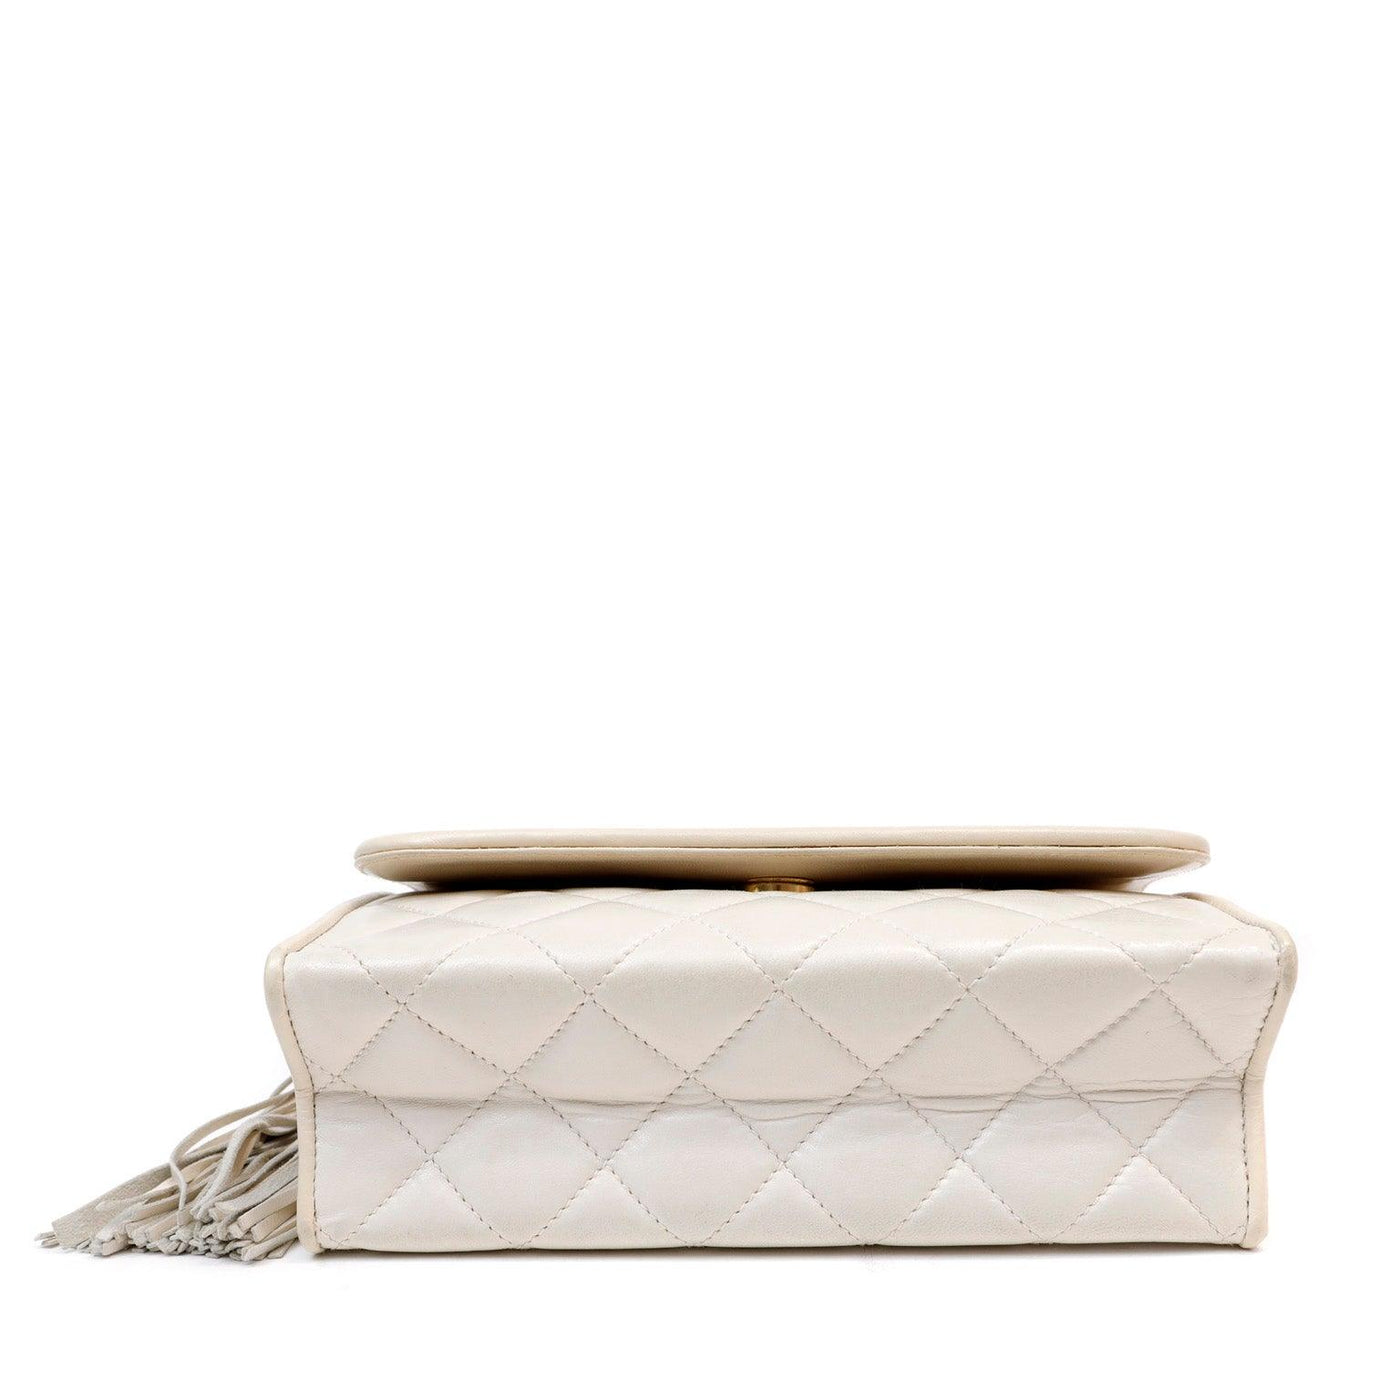 Chanel Ivory Quilted Lambskin Vintage Flap Bag - Only Authentics